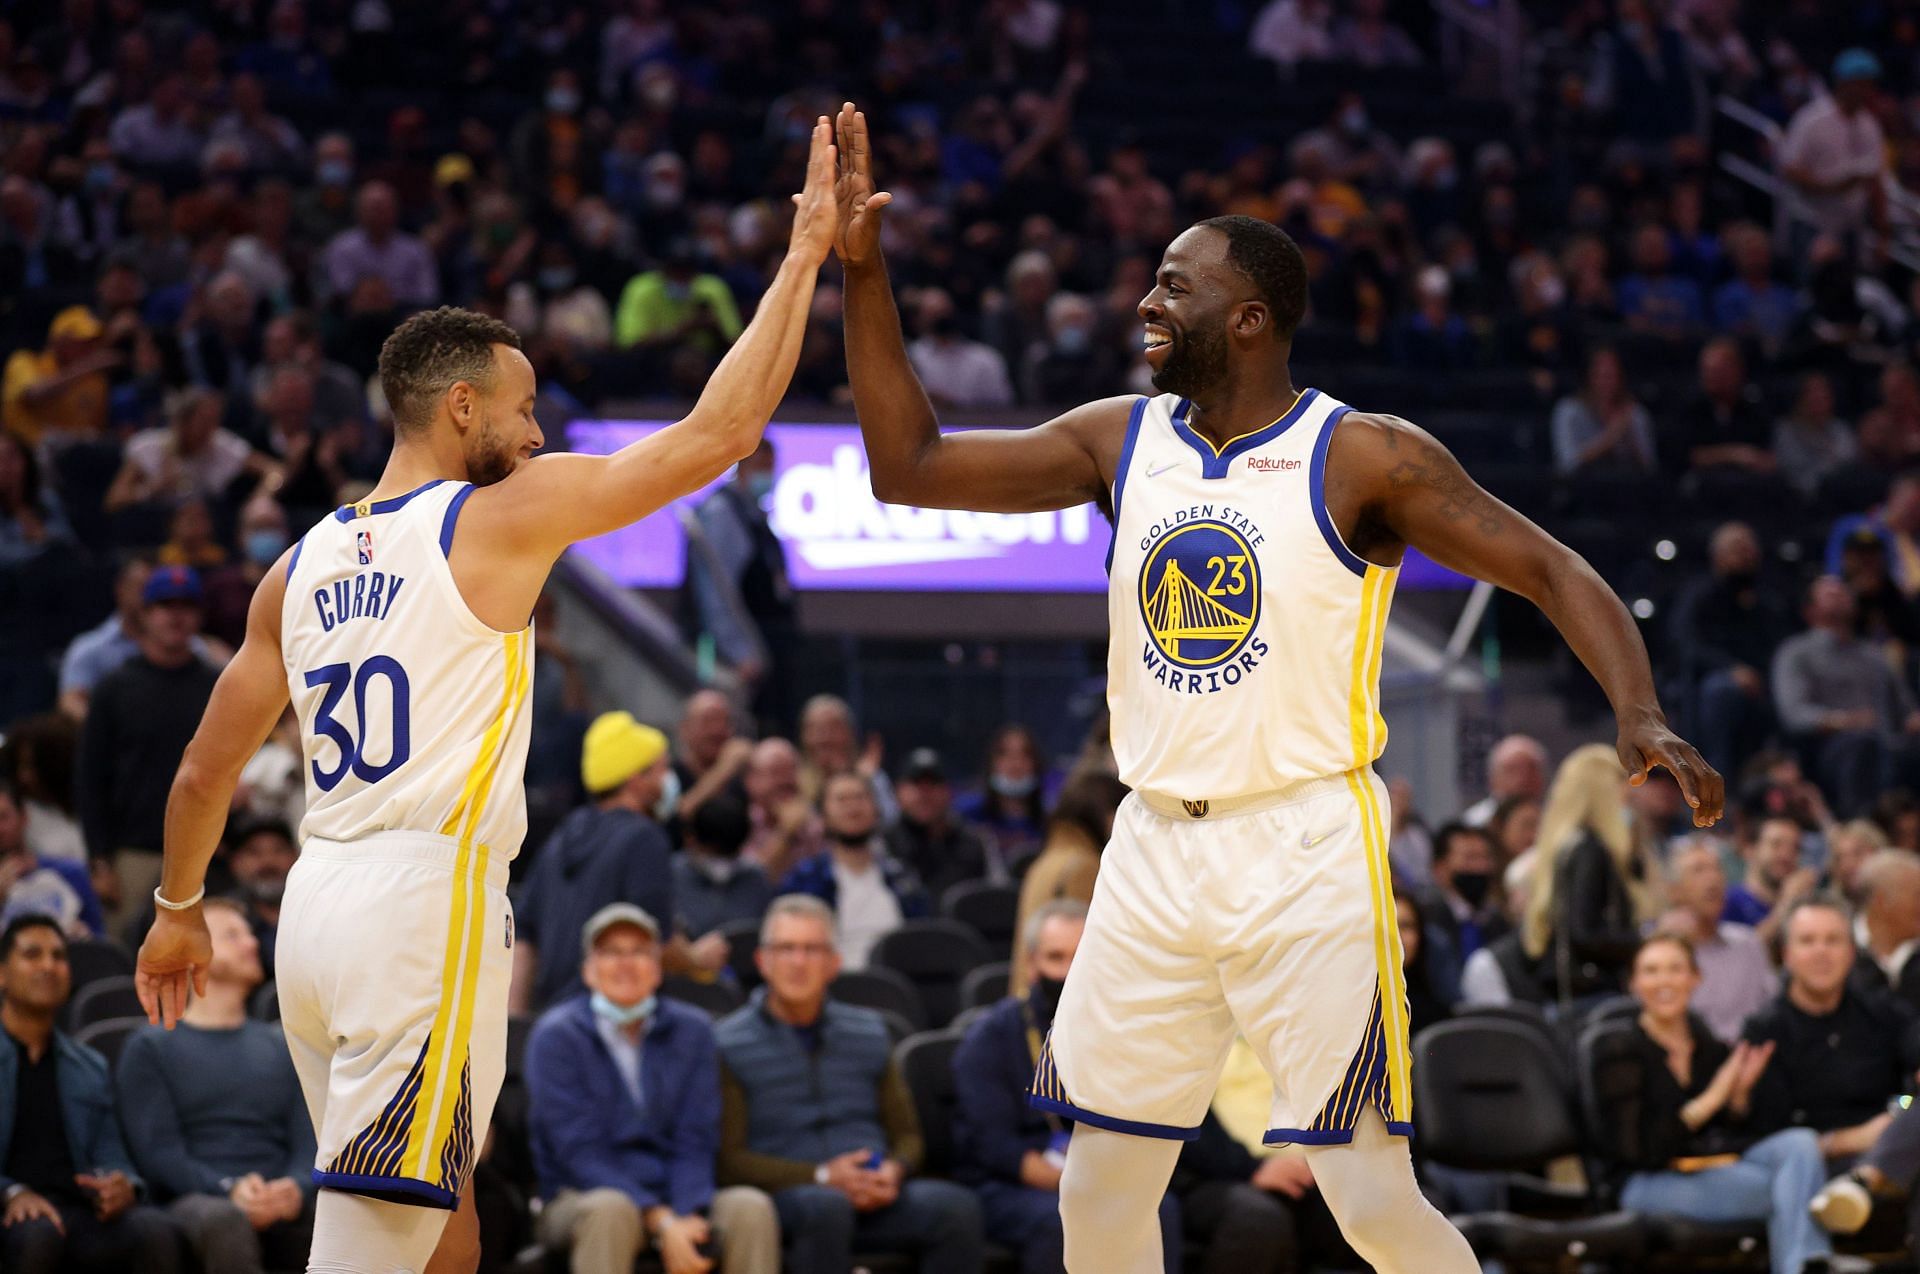 Draymond Green of the Golden State Warriors high-fives Steph Curry